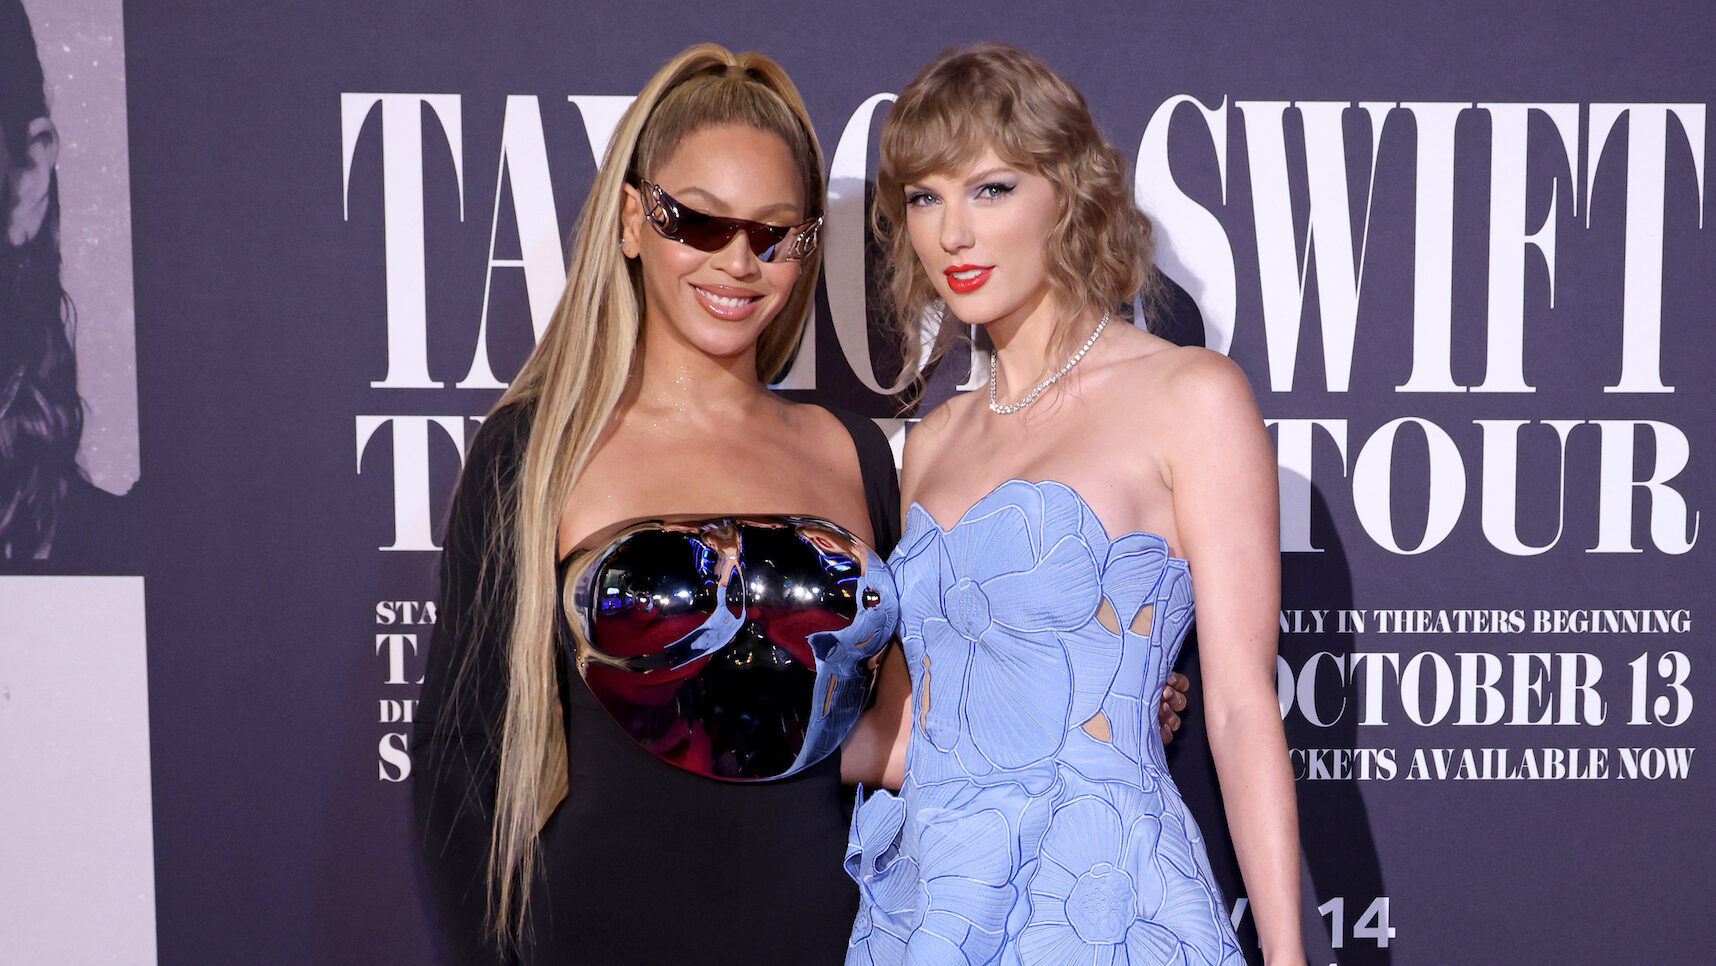 Palestinian Group Calls for Taylor Swift and Beyonce To Pull Films From